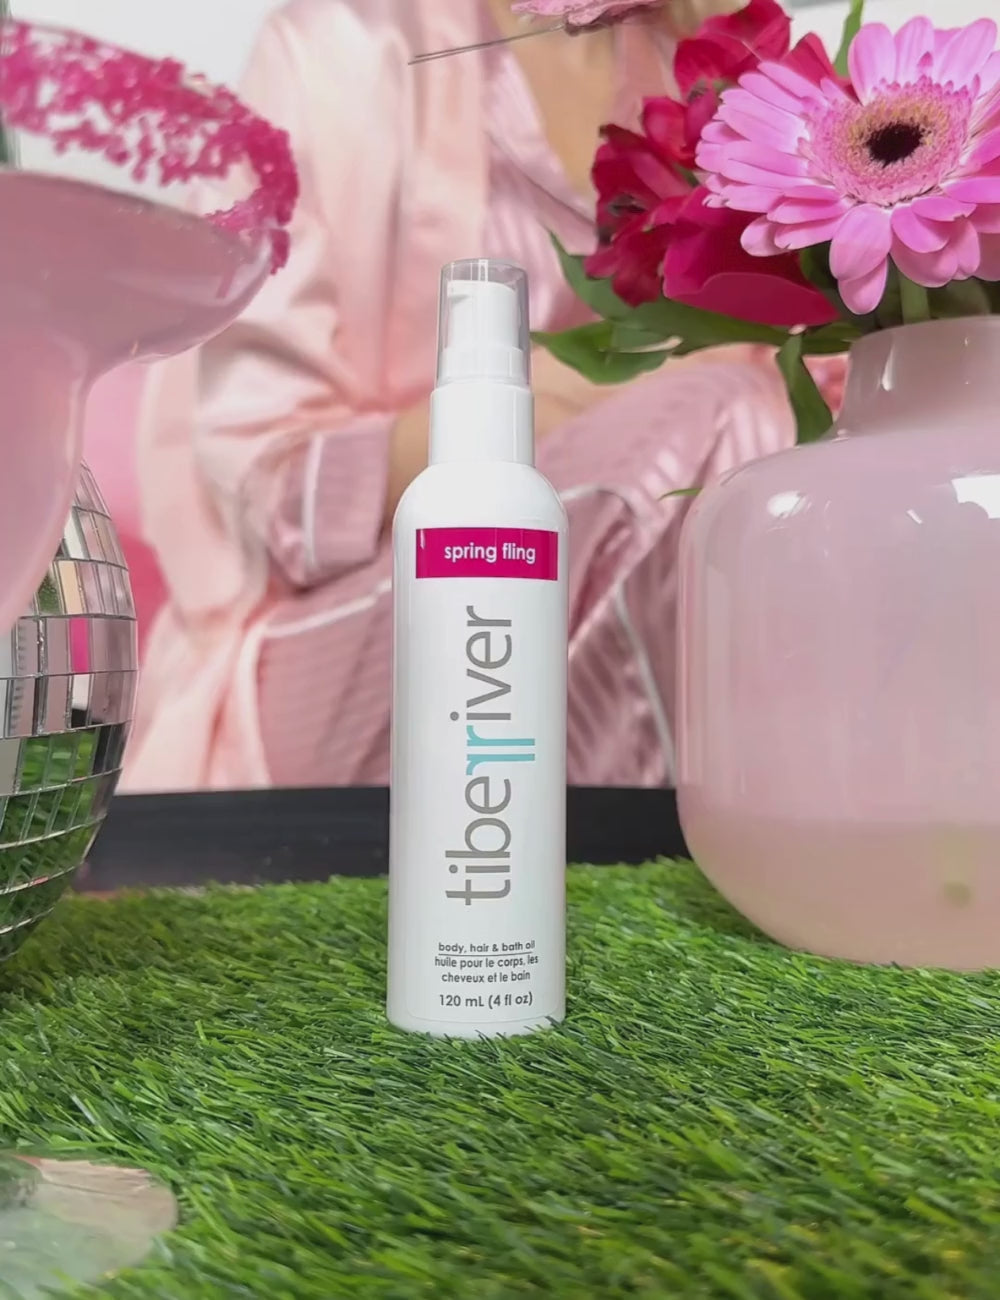 Spring Fling Body, Hair and Bath Oil being used on skin in video